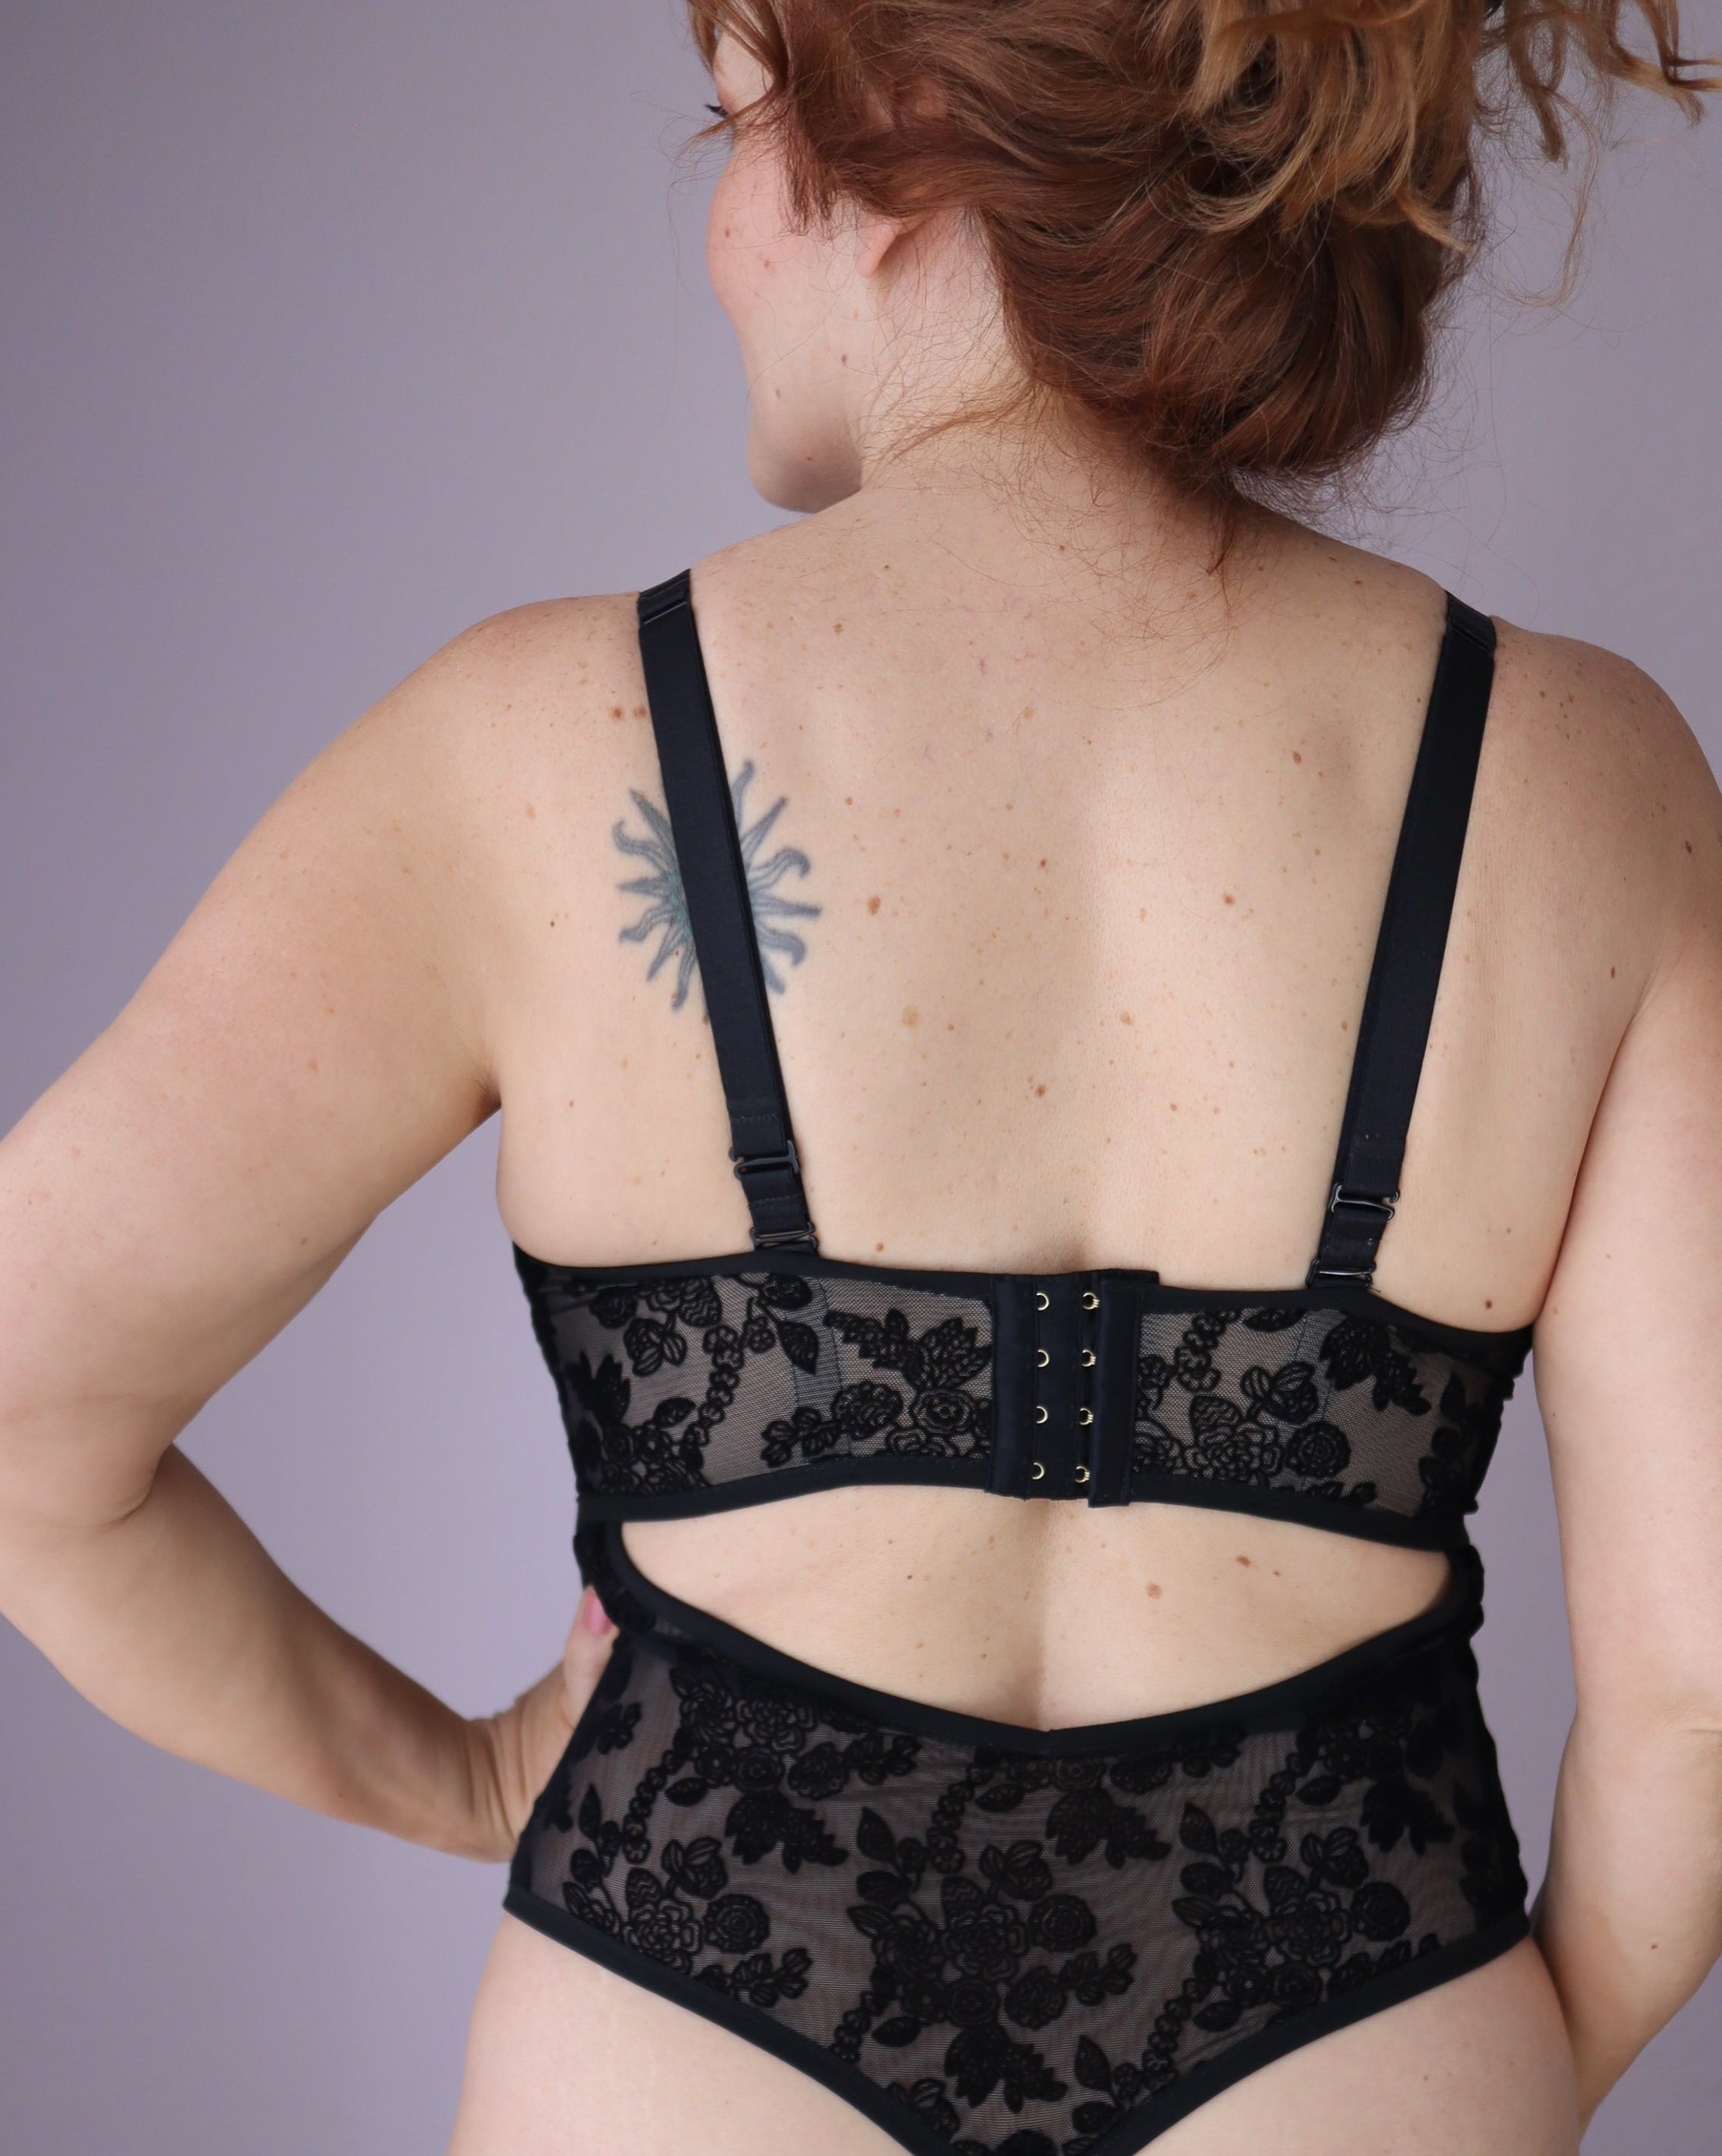 Rubies Custom Bras: back shot of our custom bespoke bodysuit in black sheer velvet. Made to order and made to measure in Canada and USA. Book an online fitting with an bra fit specialist and expert. Specializing in asymmetry, mastectomy, nursing, large cup sizes, and other special needs.